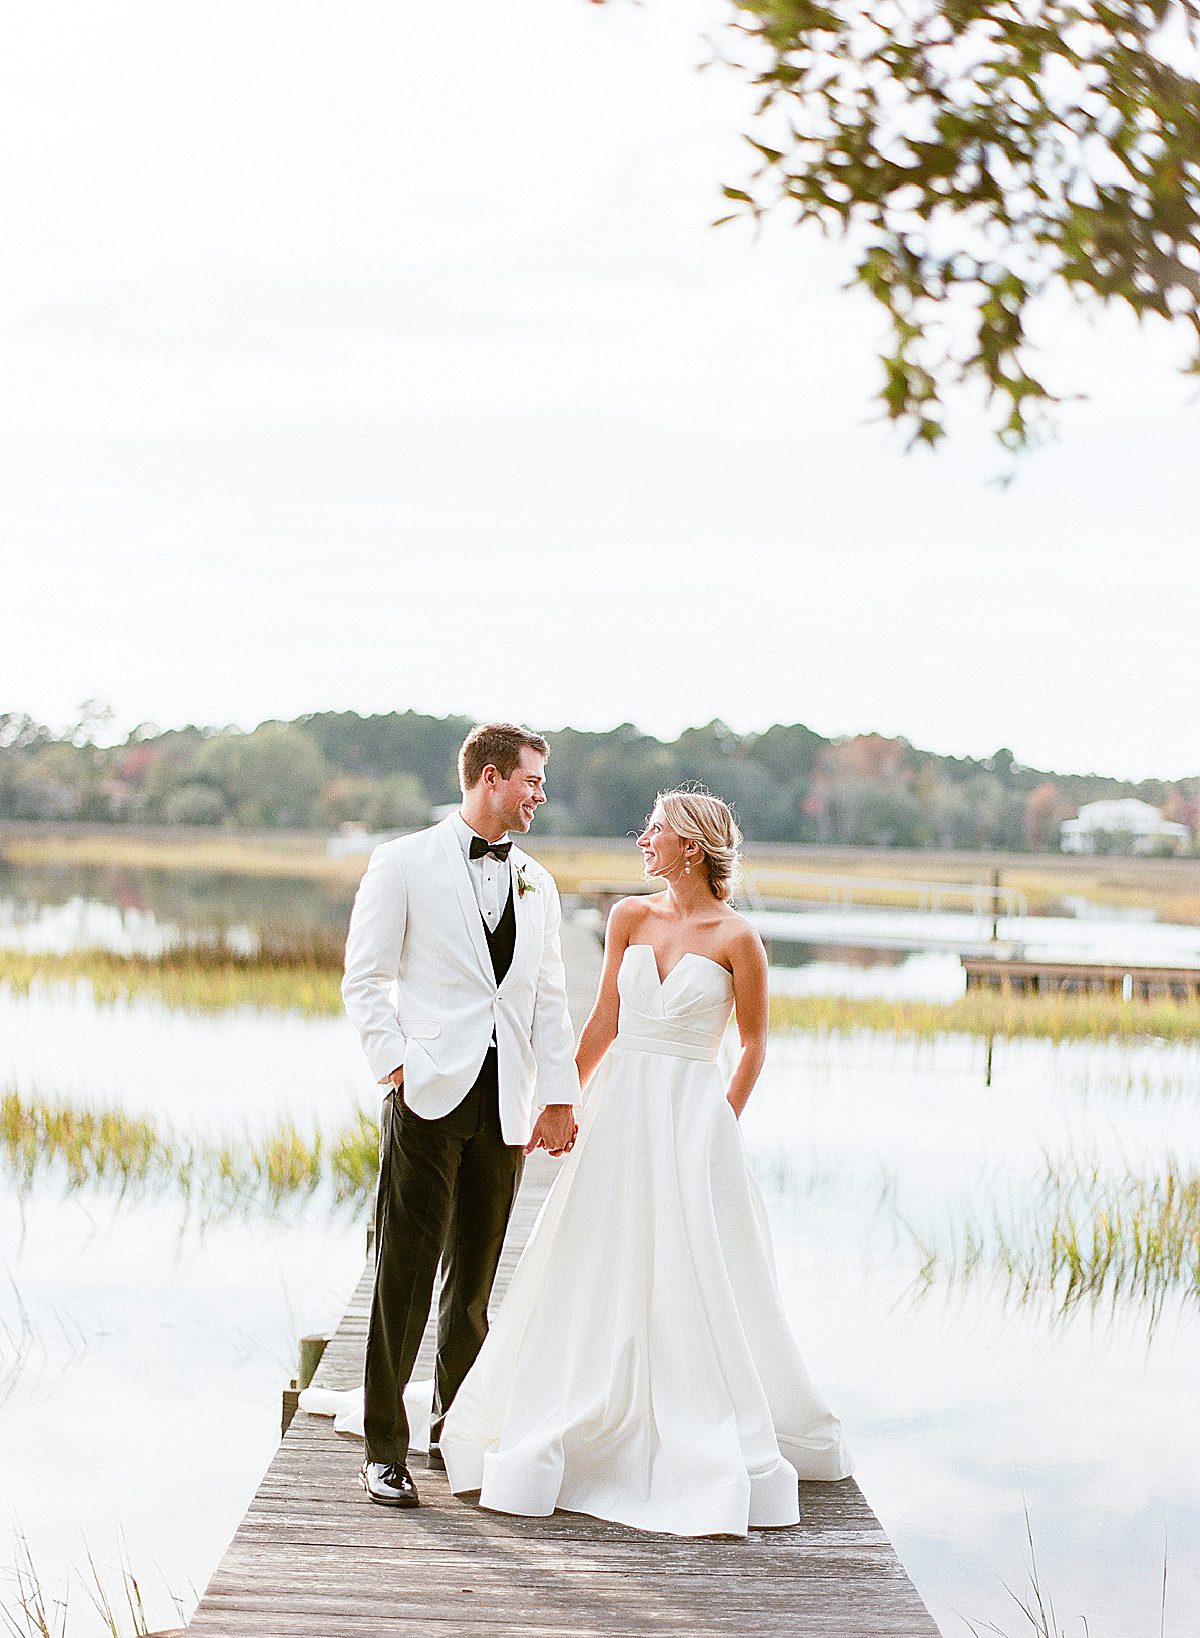 Wedding Venue In Charleston Bride and Groom On Dock Smiling at Each Other Photo